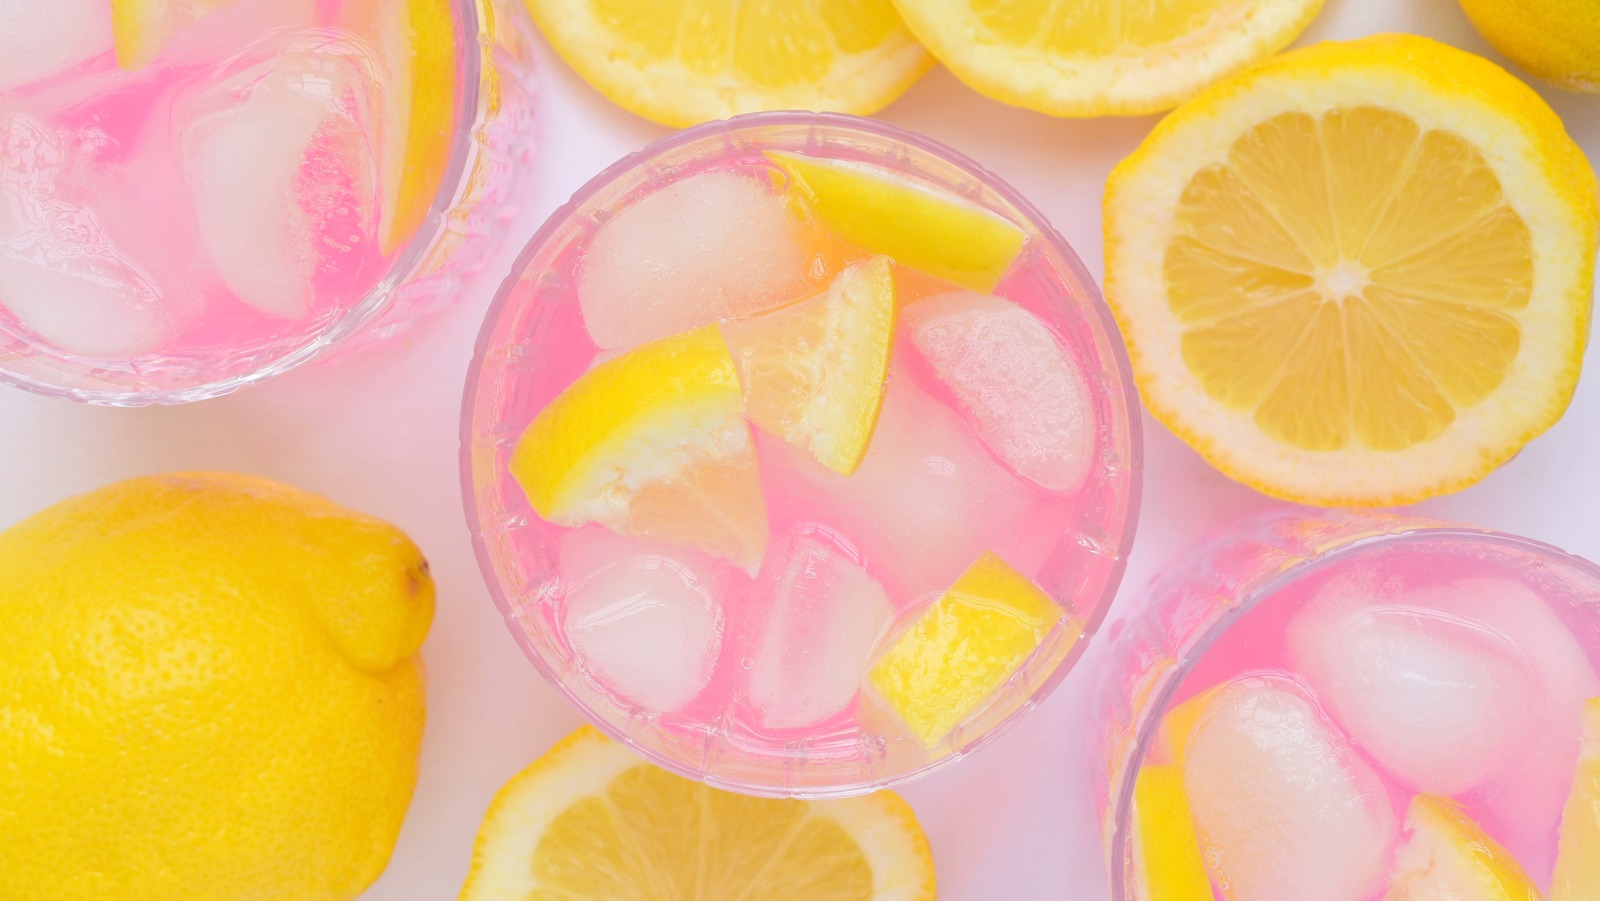 What, Exactly, Is The Pink In Pink Lemonade?